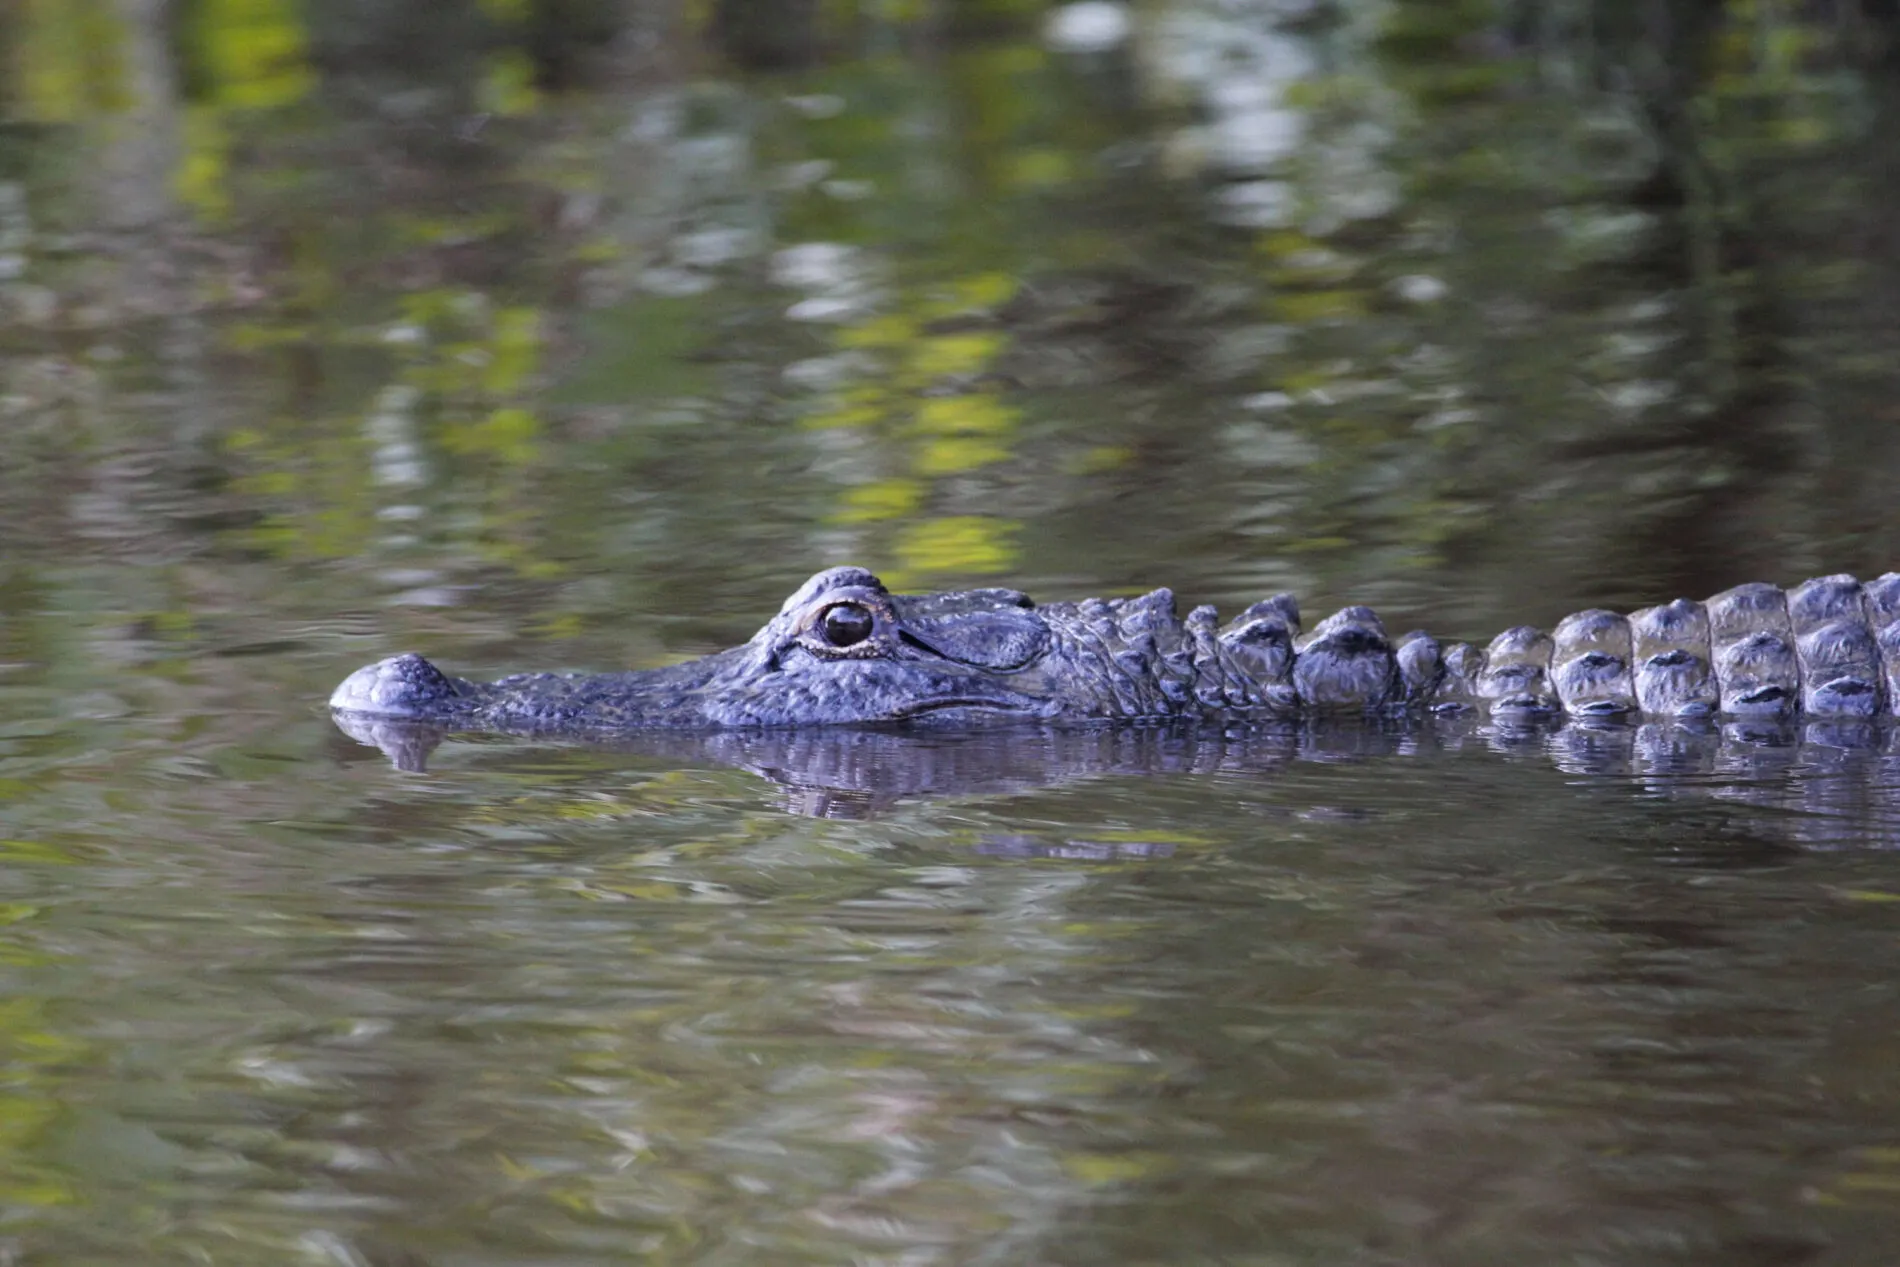 Gator Tours or swamp tours are the number one thing to do in Lafayette.